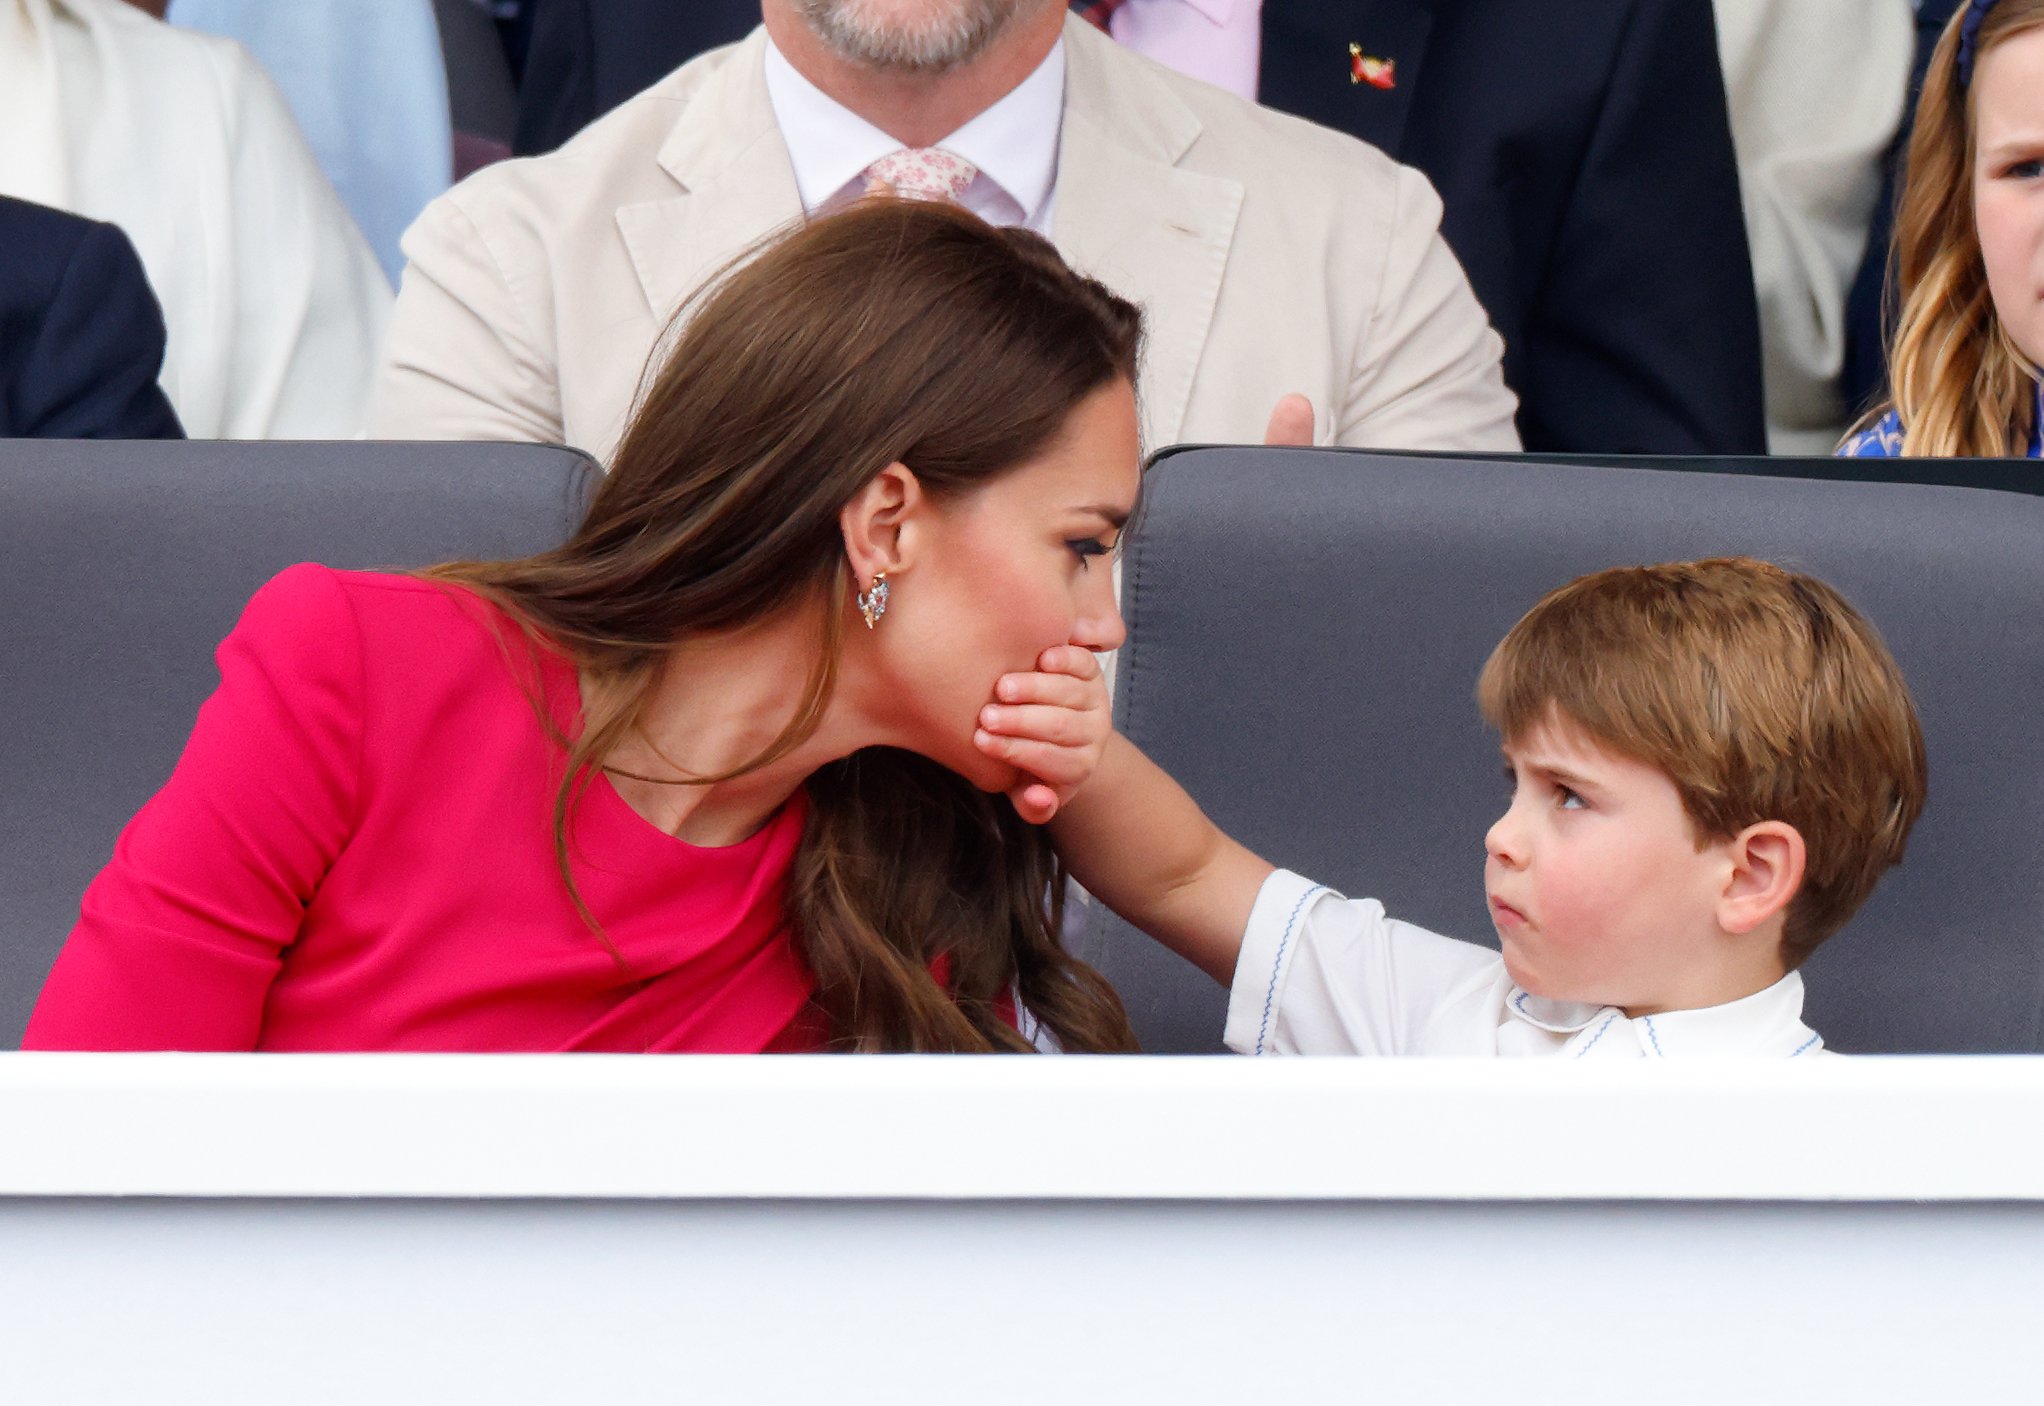 Prince Louis covering his mom Kate Middleton's mouth with his hand at the Platinum Pageant